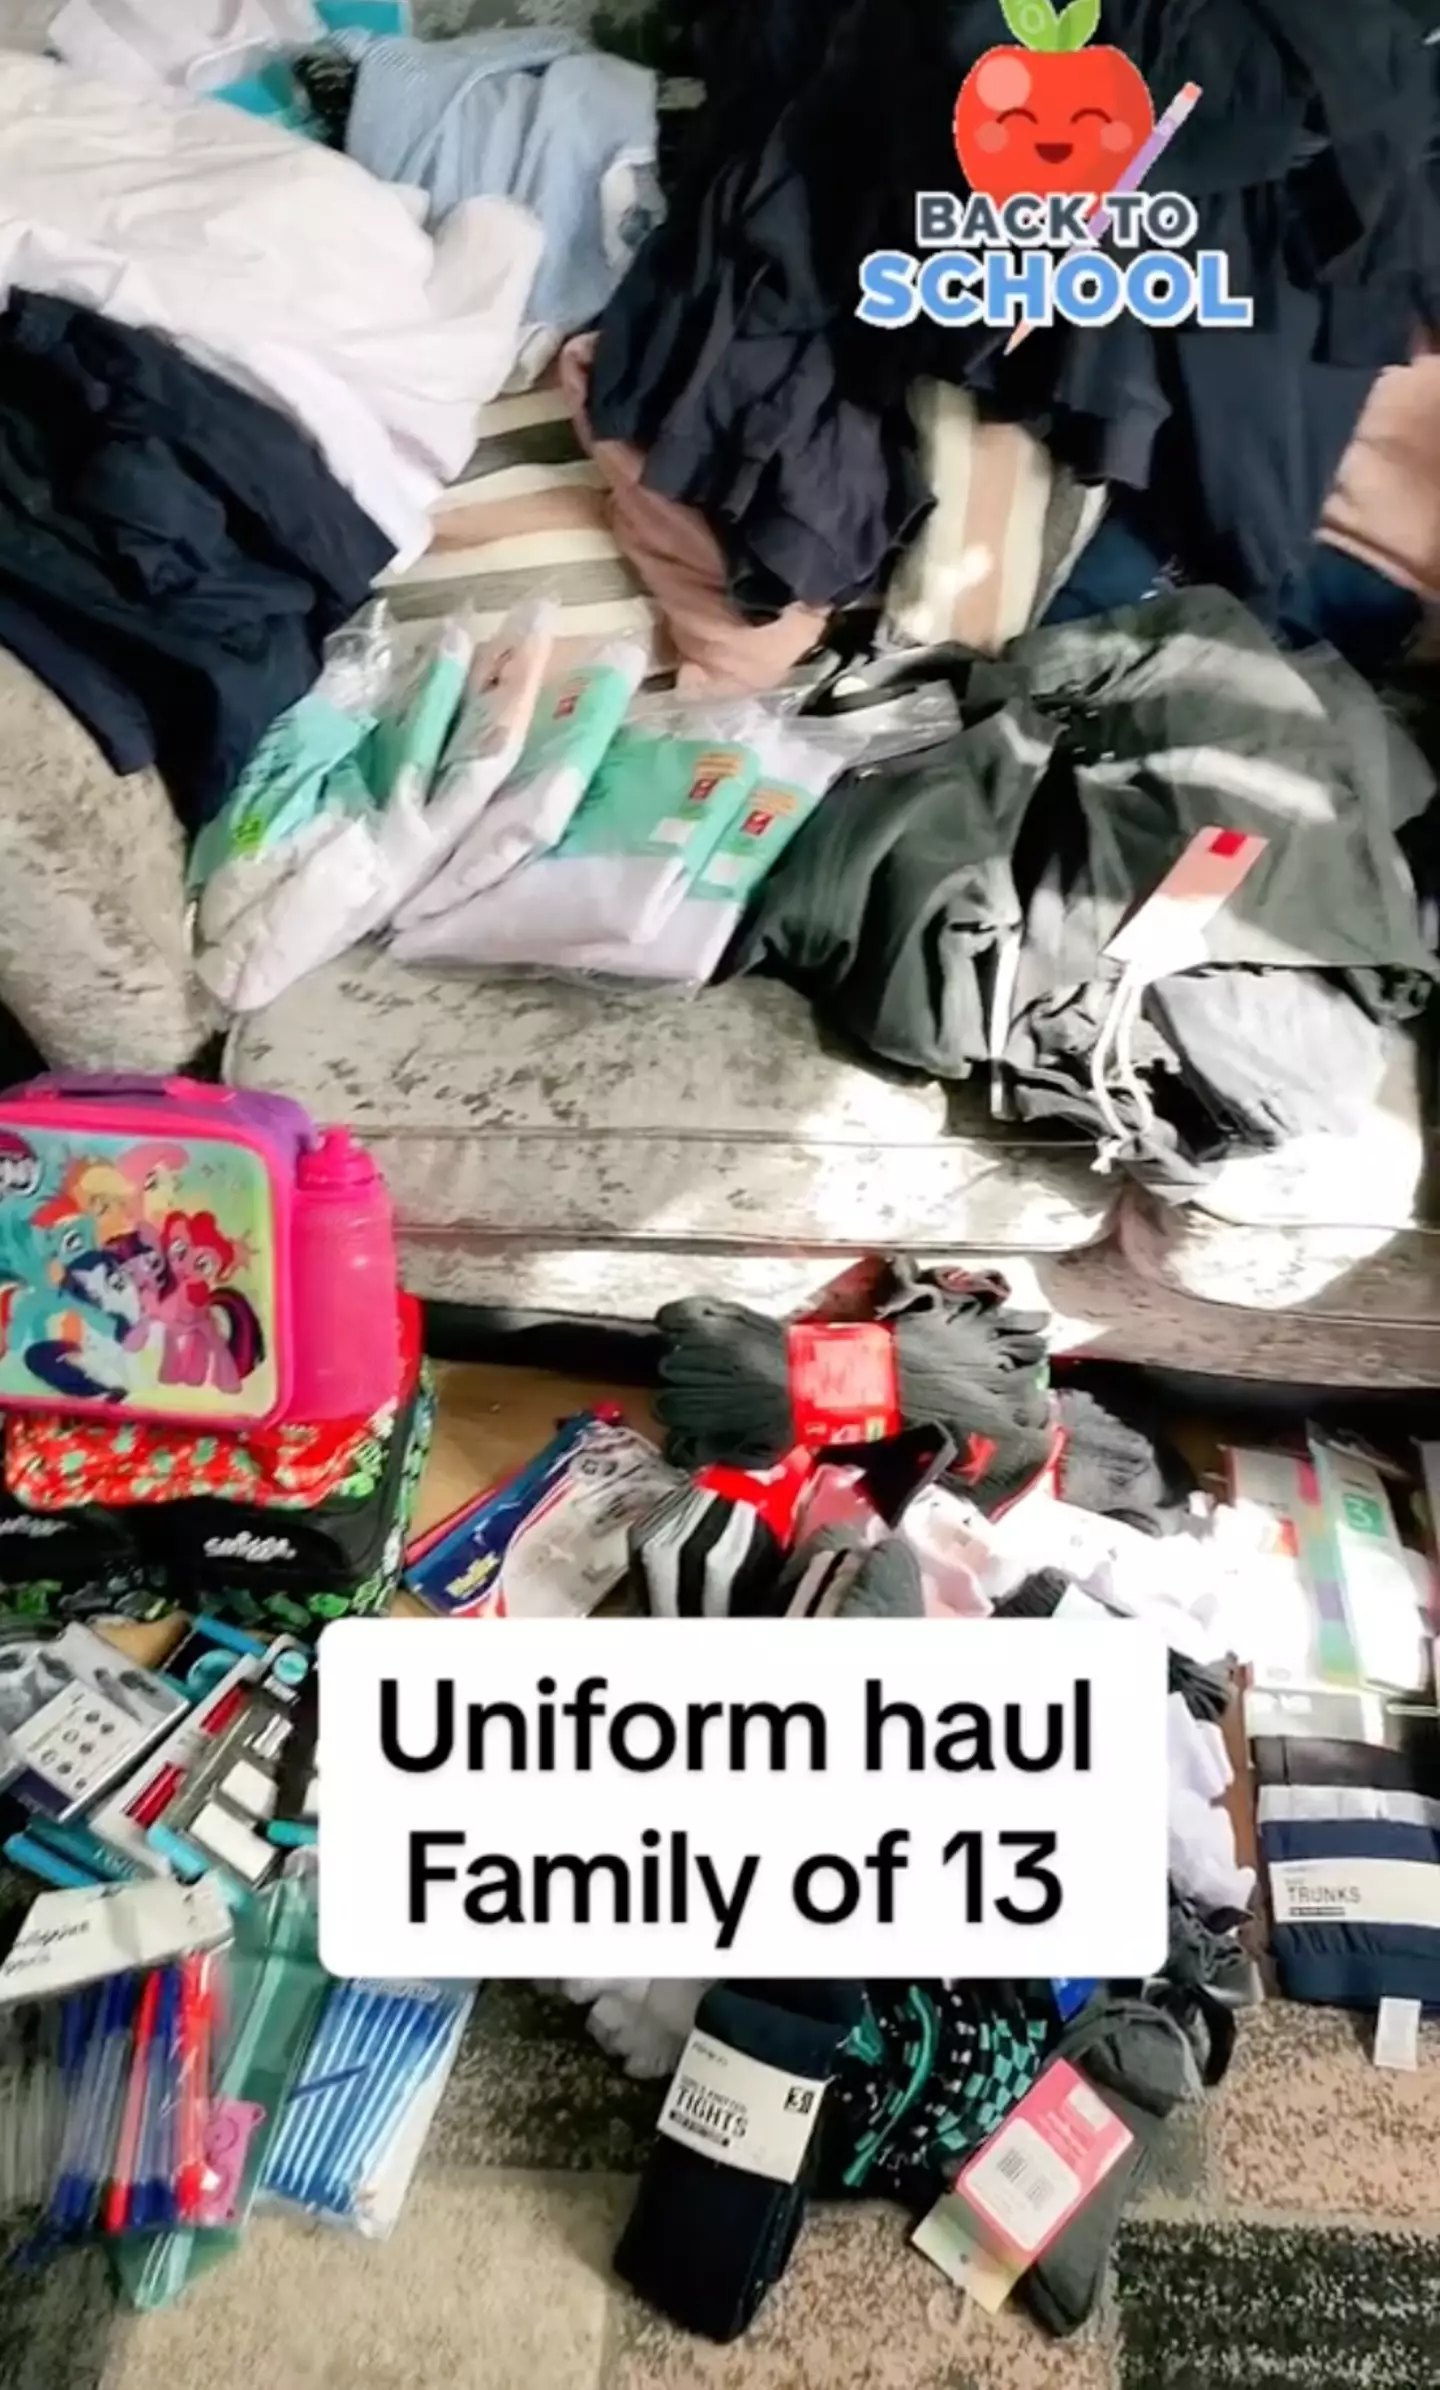 Joanne had to buy stacks of new uniform for her children.